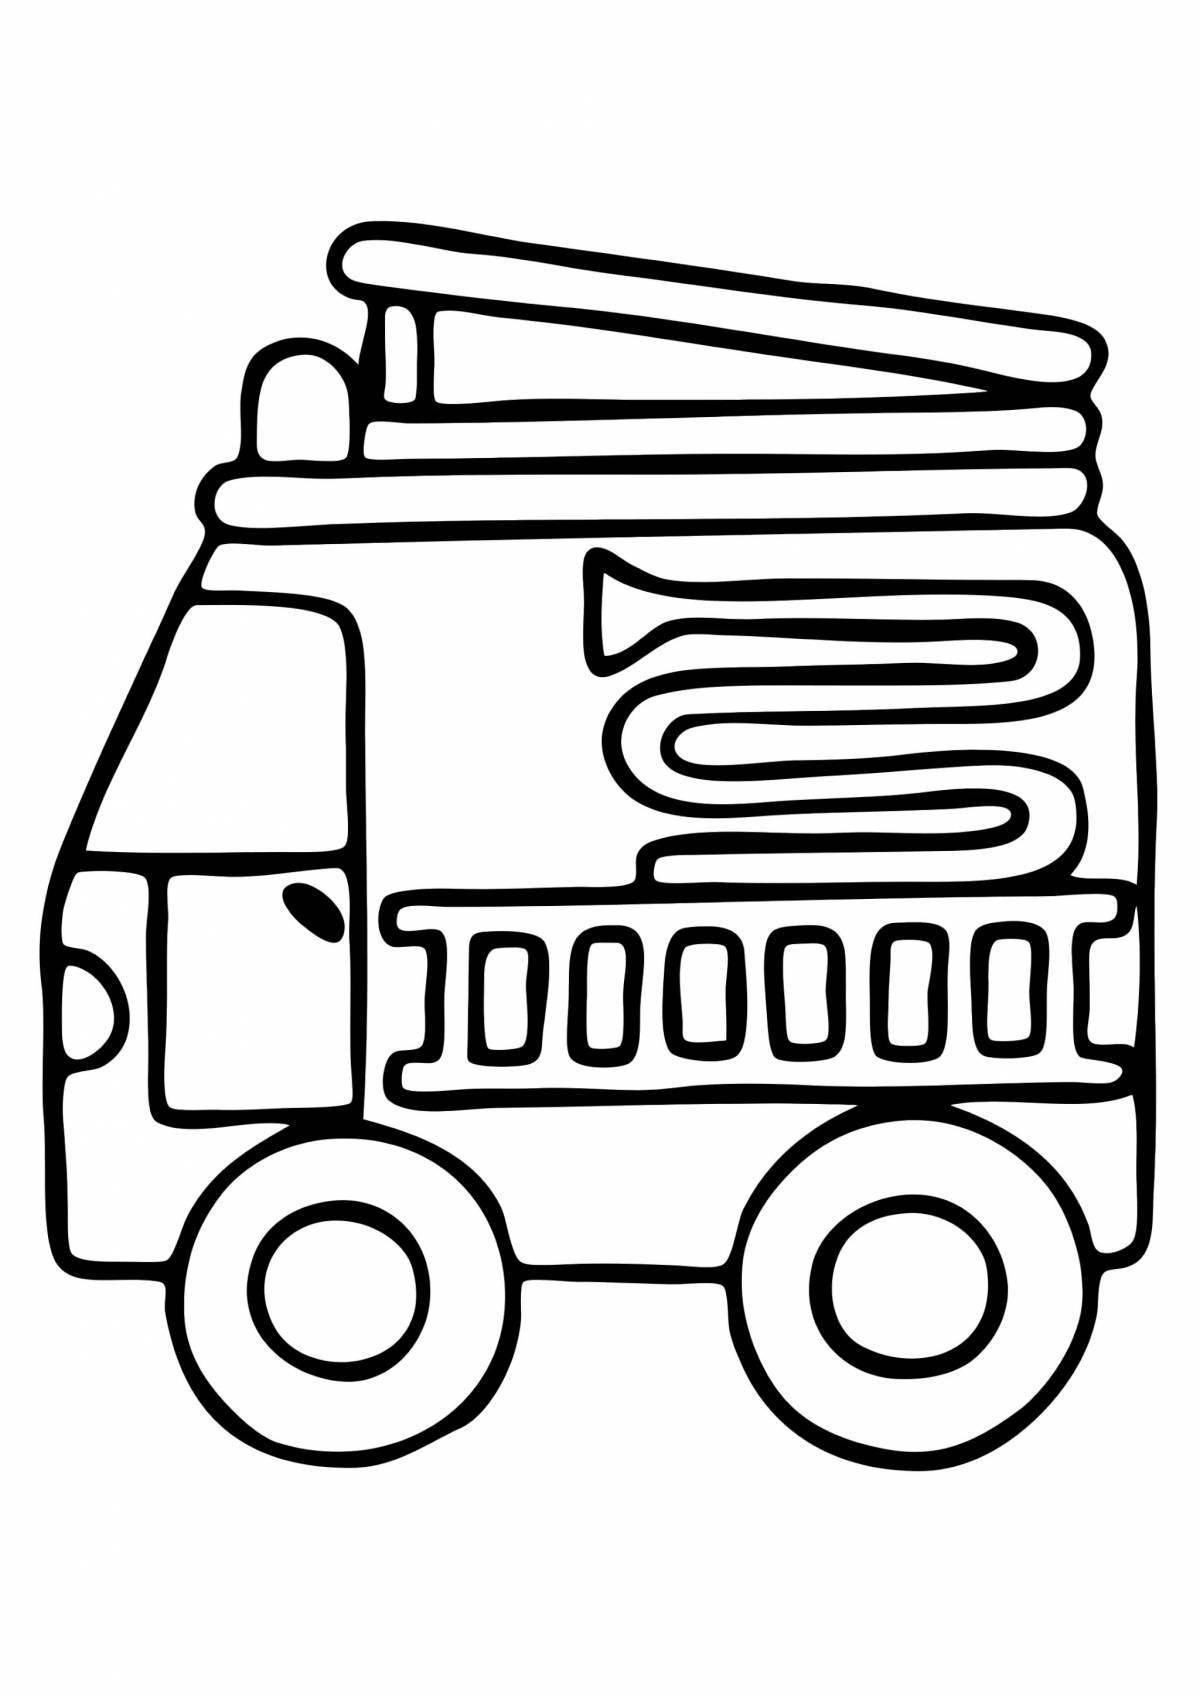 Adorable fire truck coloring book for 2-3 year olds